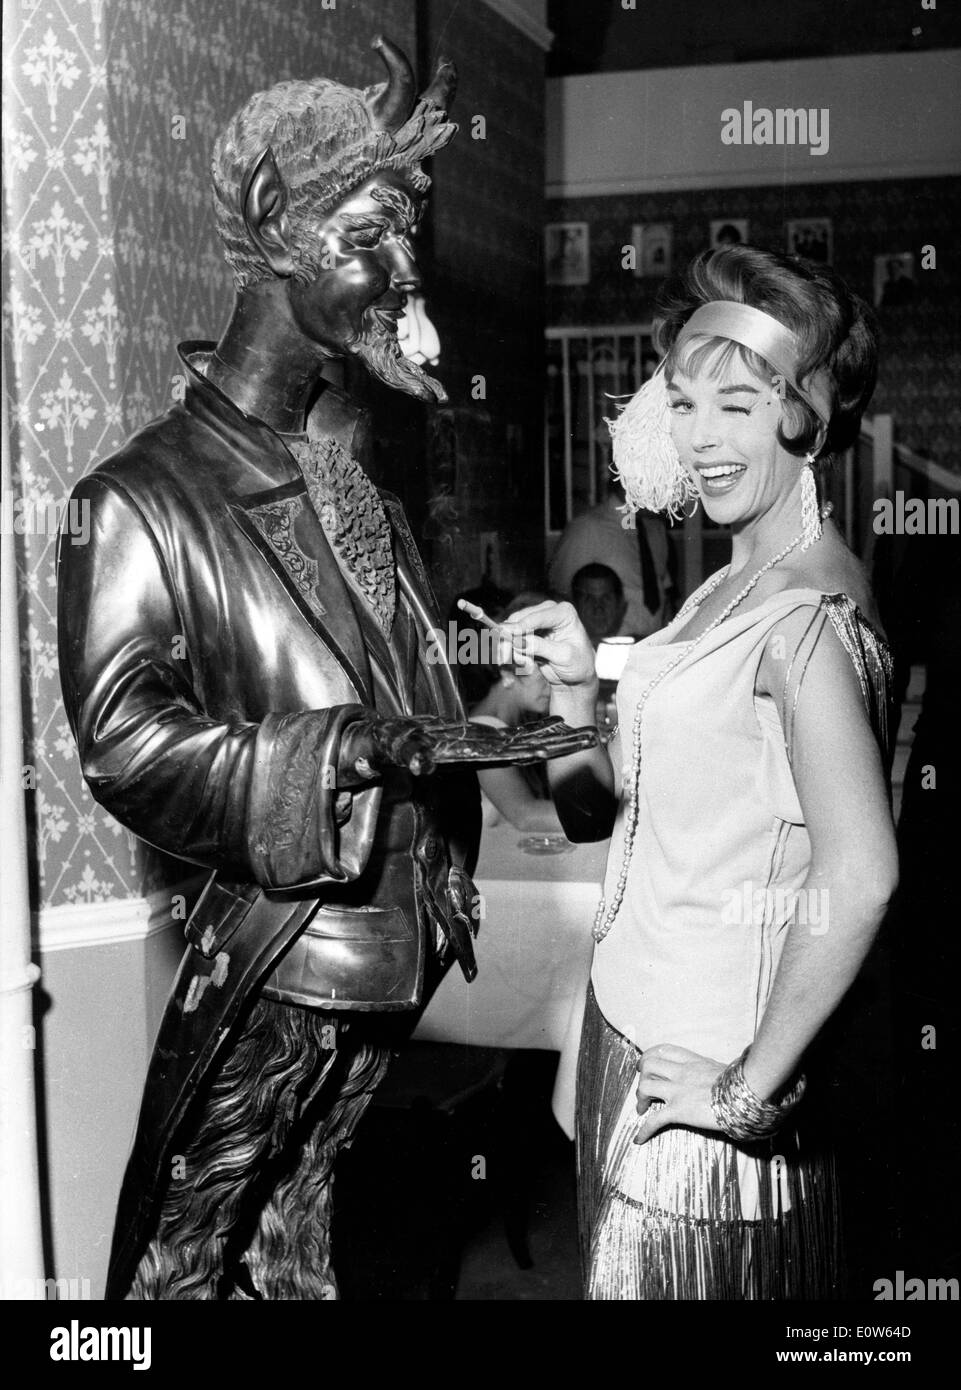 Actress Dawn Addams using the Devil statue as an ashtray Stock Photo